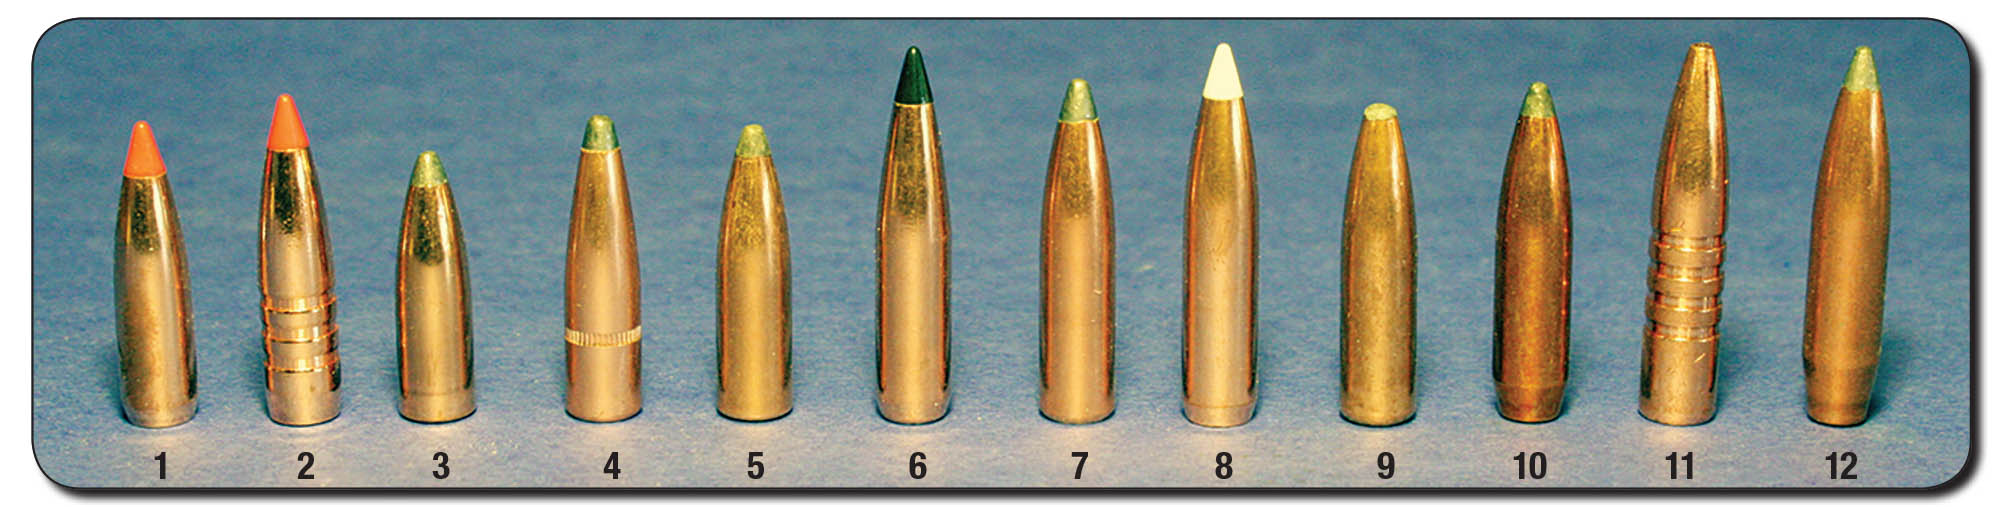 The 7x57 works very well with a wide variety of big-game bullets from 120 to 175 grains. The 7mm bullets shown here include the (1) Nosler 120-grain Ballistic Tip, (2) Barnes 120 Tipped TSX, (3) Speer 130 Hot-Cor, (4) Hornady 139 Spire Point, (5) Nosler 140 Partition, (6) Swift 150 Scirocco II, (7) Nosler 160 Partition, (8) Nosler 160 AccuBond, (9) Norma 156 Oryx, (10) Sierra 160 GameKing, (11) Barnes 160 TSX and a (12) Sierra 175-grain GameKing.